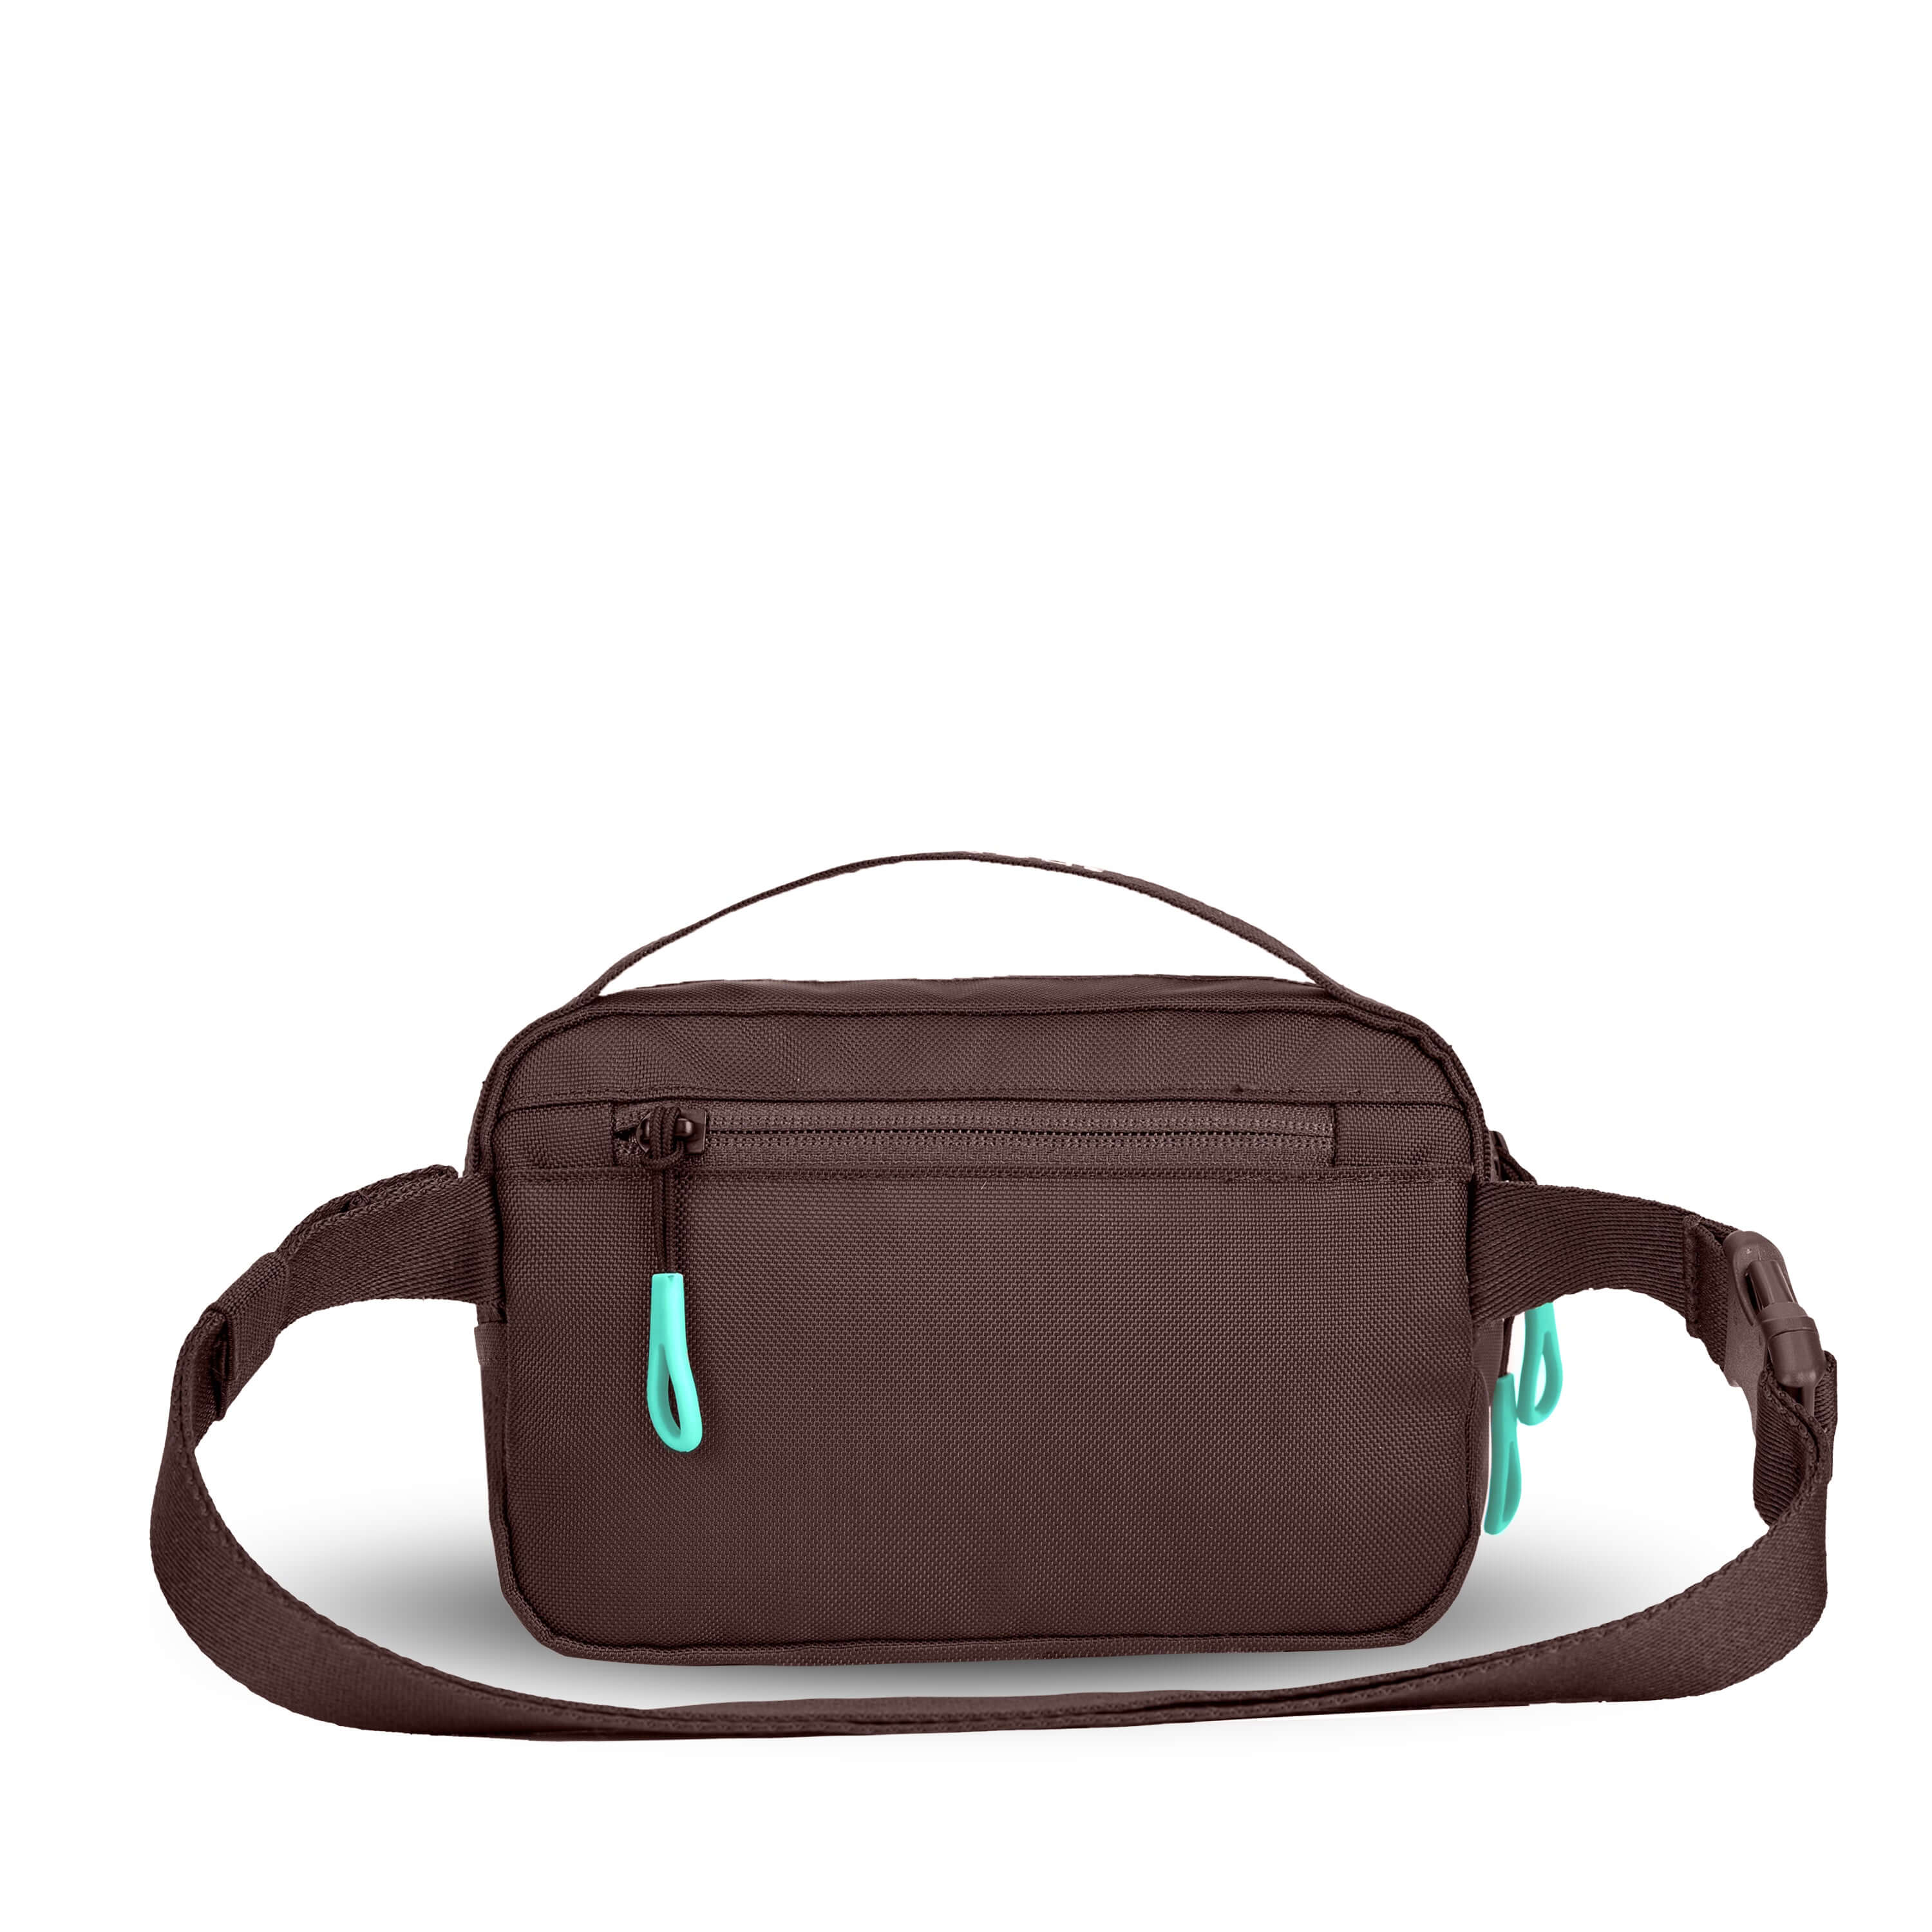 Back view of Sherpani's fanny pack, the Hyk in Lavender. The back of the bag is brown. Easy-pull zippers are accented in aqua. The fanny pack features an adjustable strap with a buckle. 